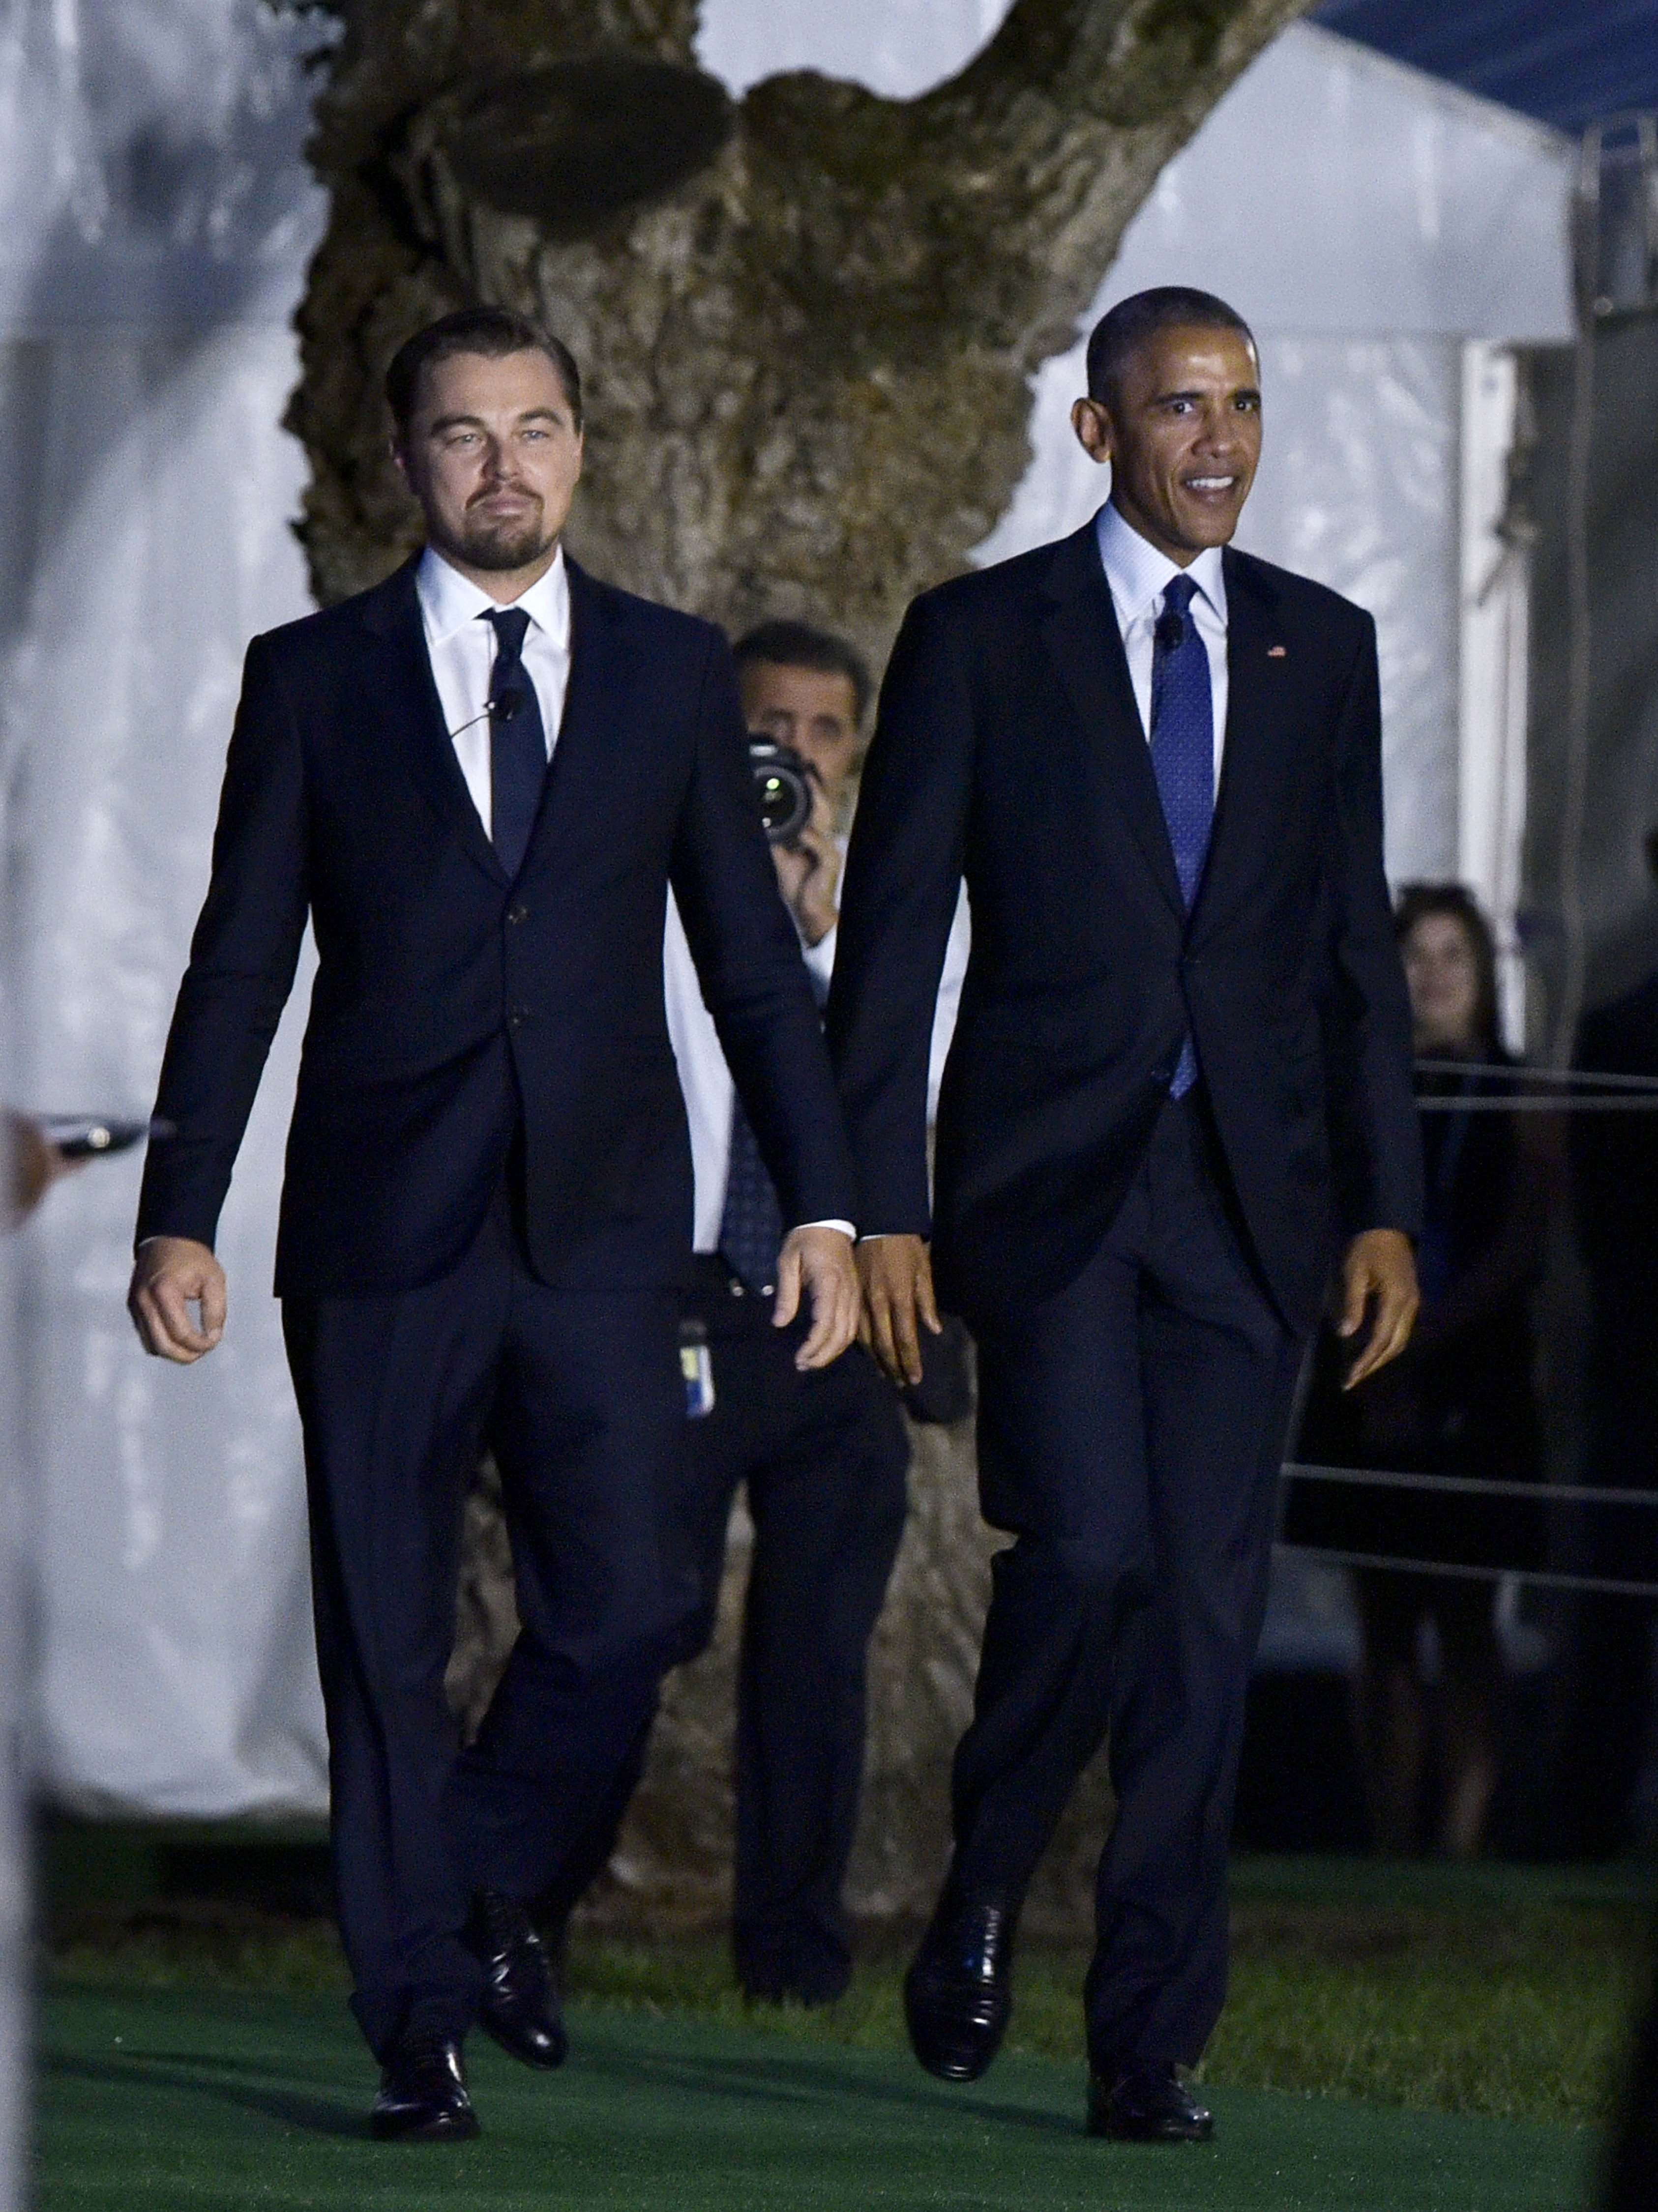 Leonardo DiCaprio and U.S. President Barack Obama arrives for a discussion on climate change during the South by South Lawn (SXSL) festival at the White House on October 3, 2016 in Washington, DC